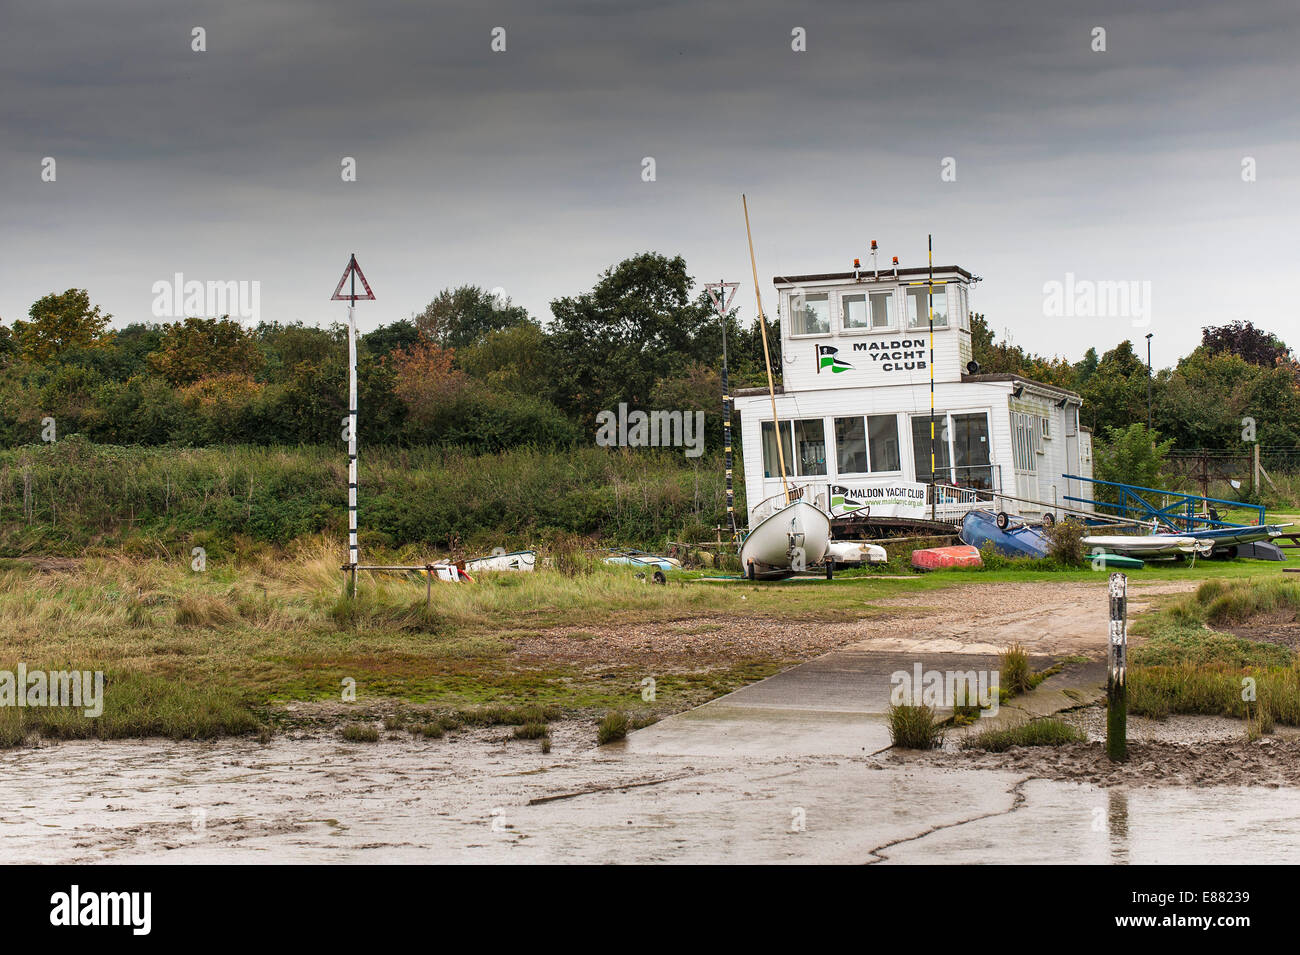 Maldon Yacht Club on the Blackwater River in Essex. Stock Photo